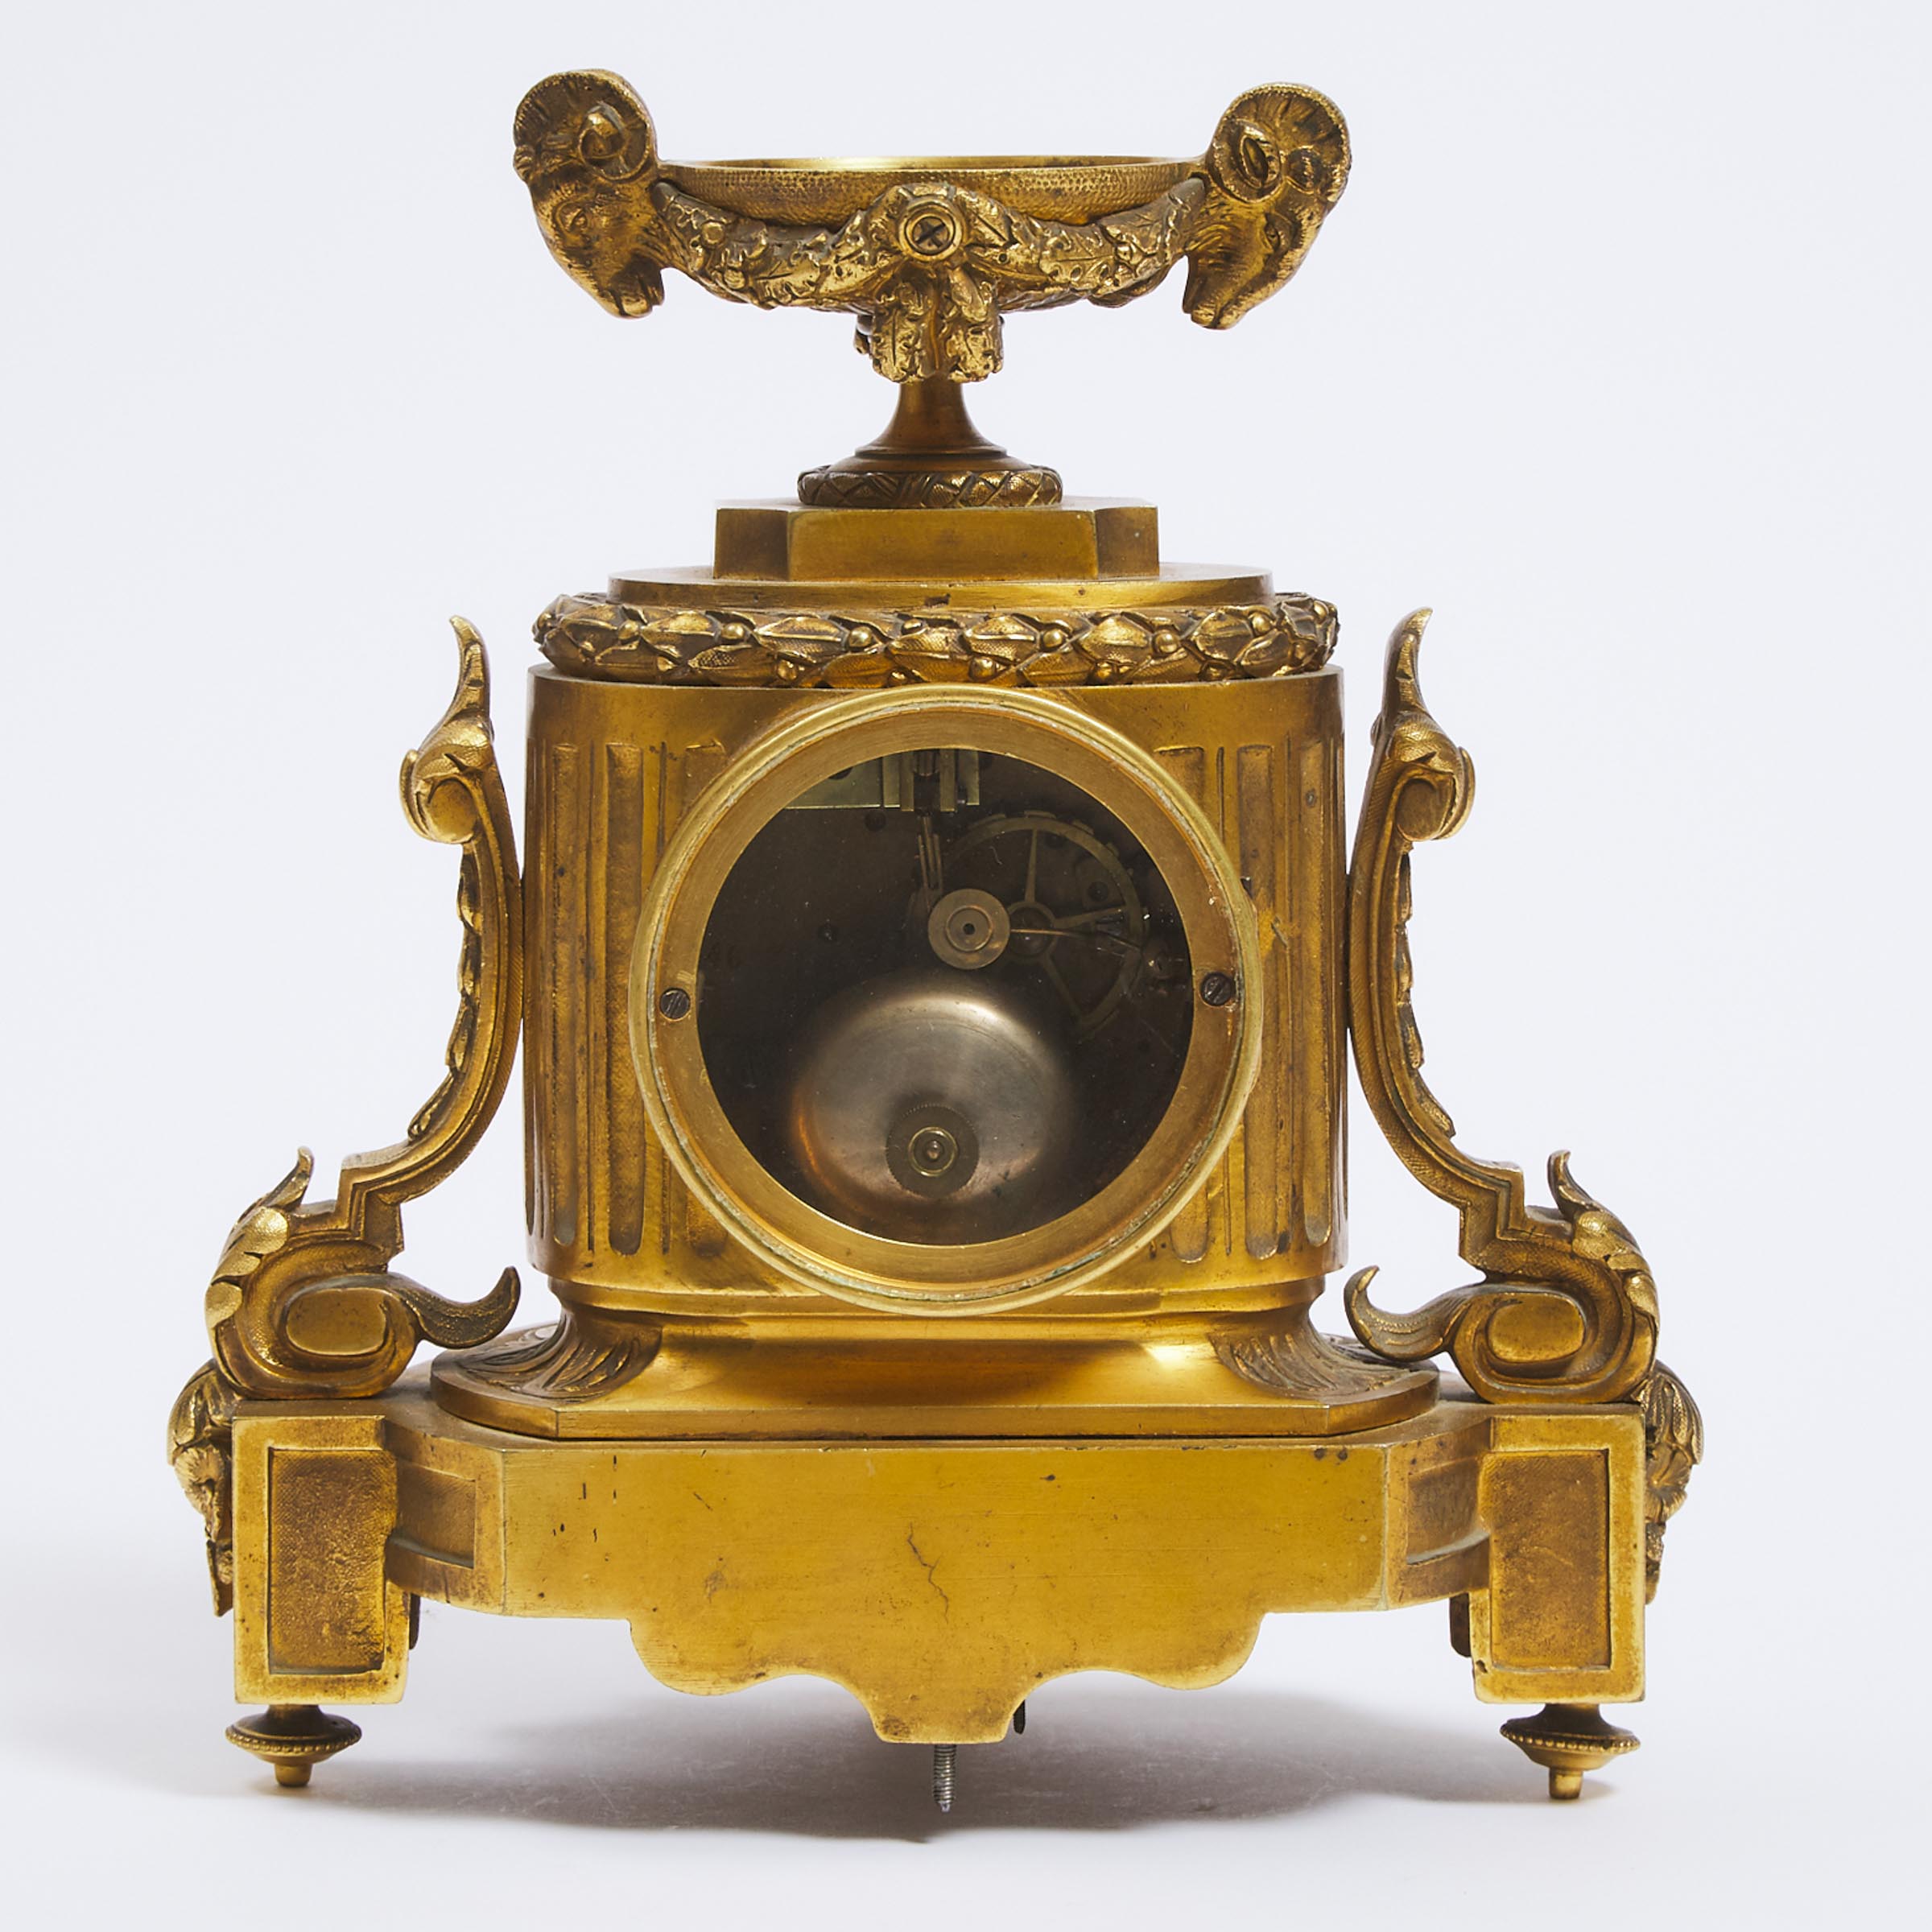 Small French Gilt Bronze Mantle Clock, Guibal a Paris, mid 19th century